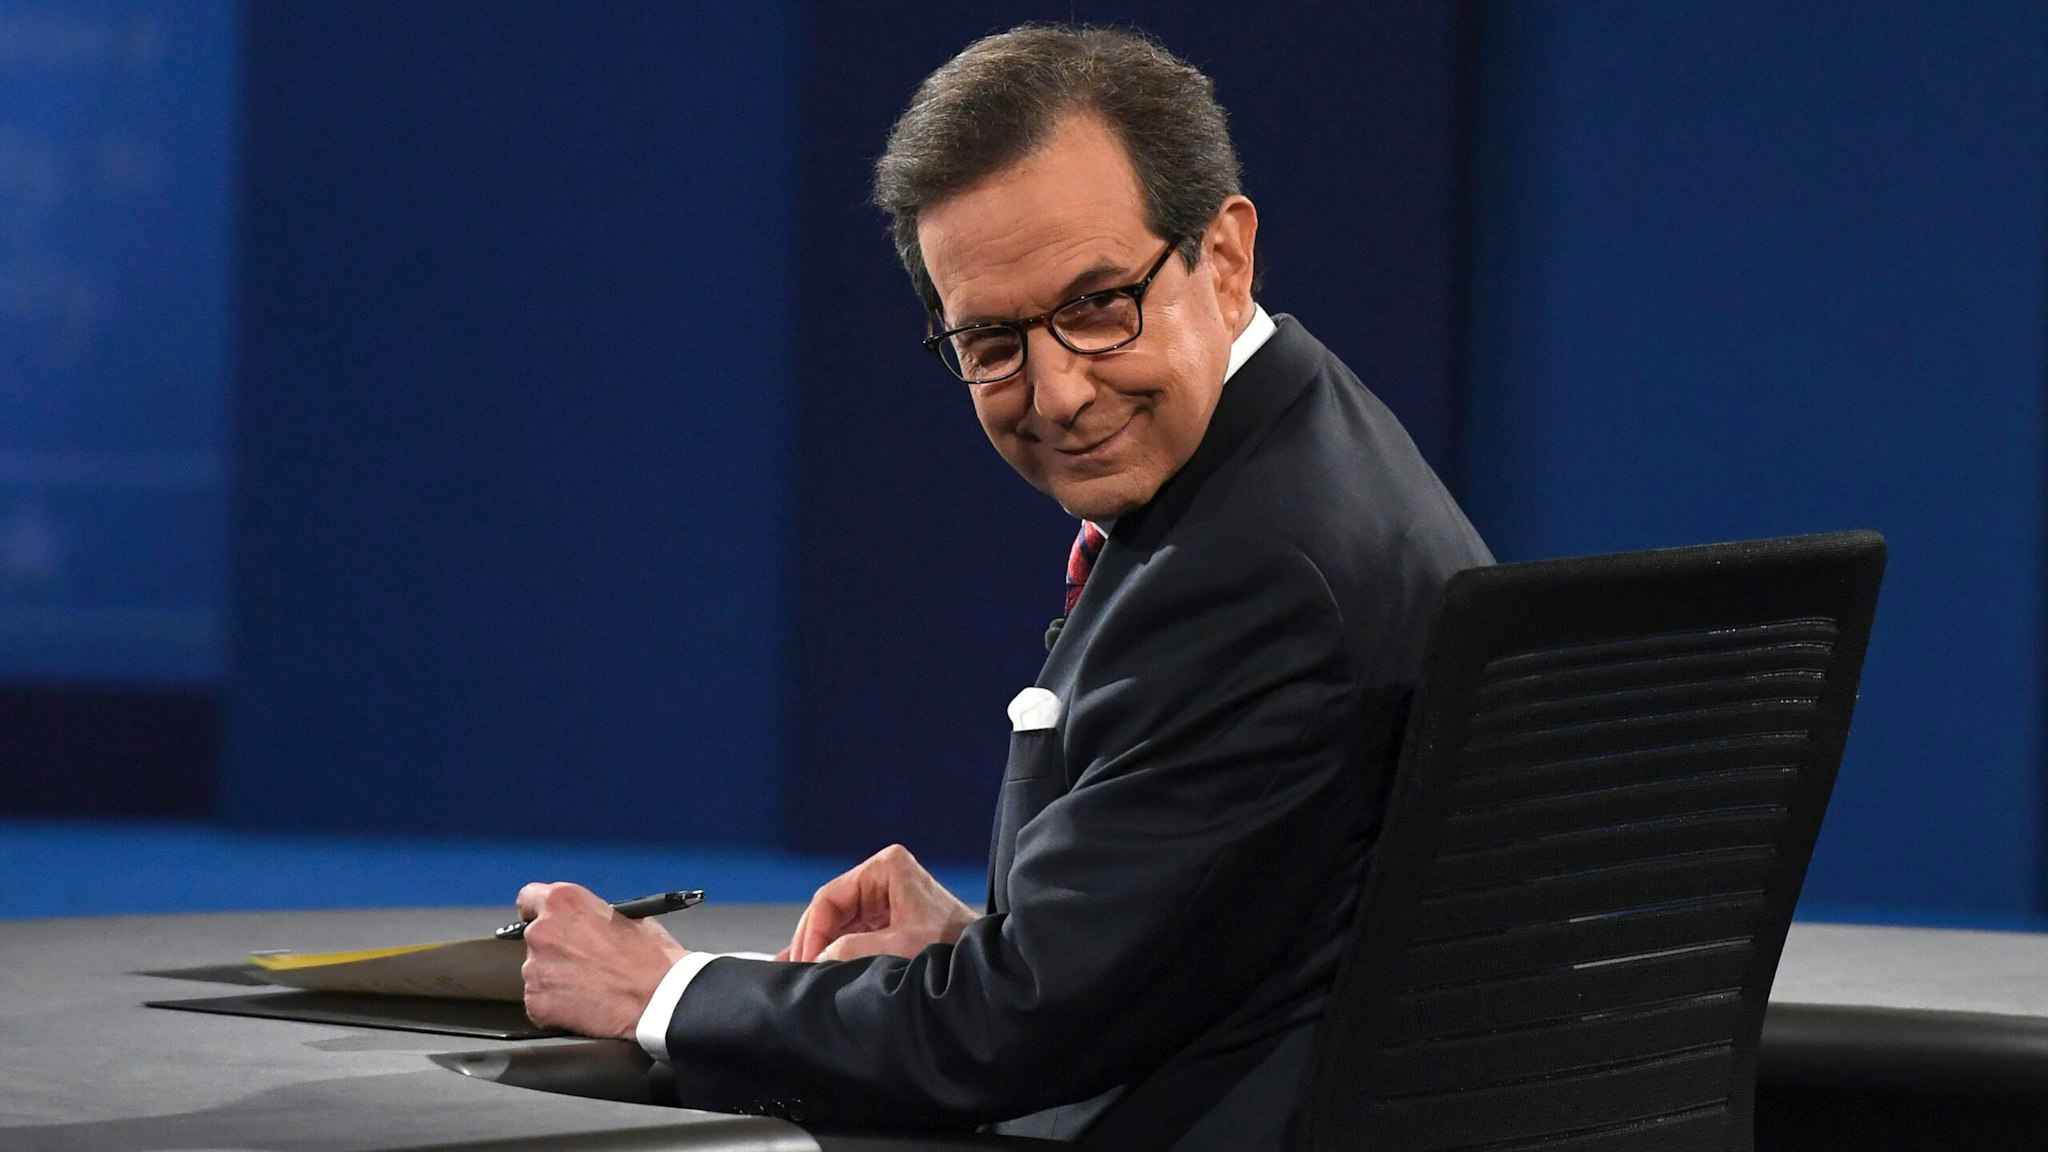 Debate moderator Chris Wallace looks on prior to the third and final US presidential debate between Democratic nominee Hillary Clinton and Republican nominee Donald Trump at the Thomas &amp; Mack Center on the campus of the University of Las Vegas in Las Vegas, Nevada on October 19, 2016.